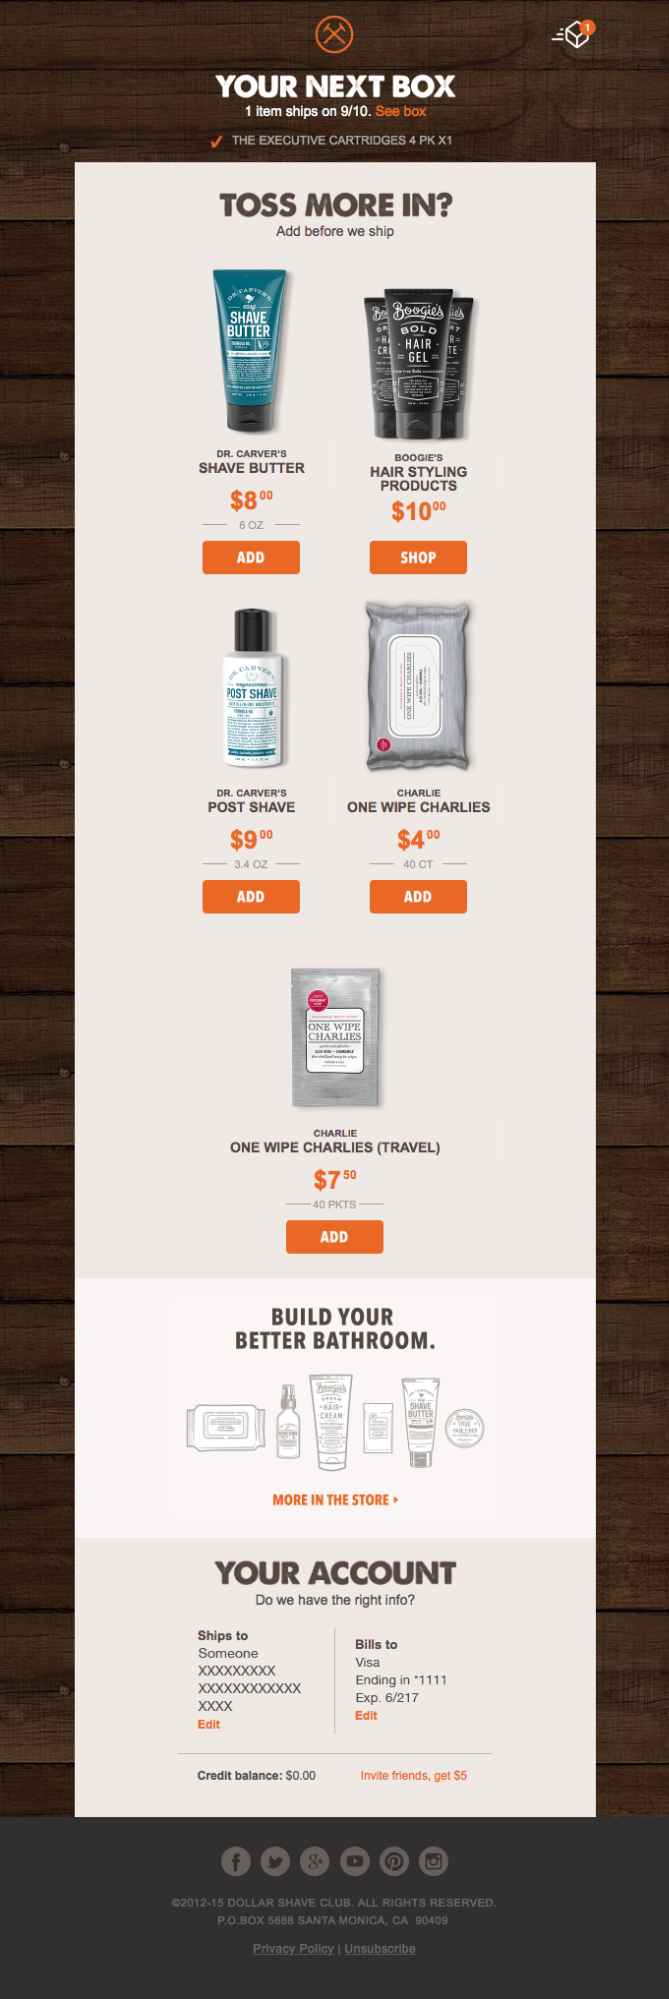 A cross-sell email from Dollar Shave Club promoting five additional products.